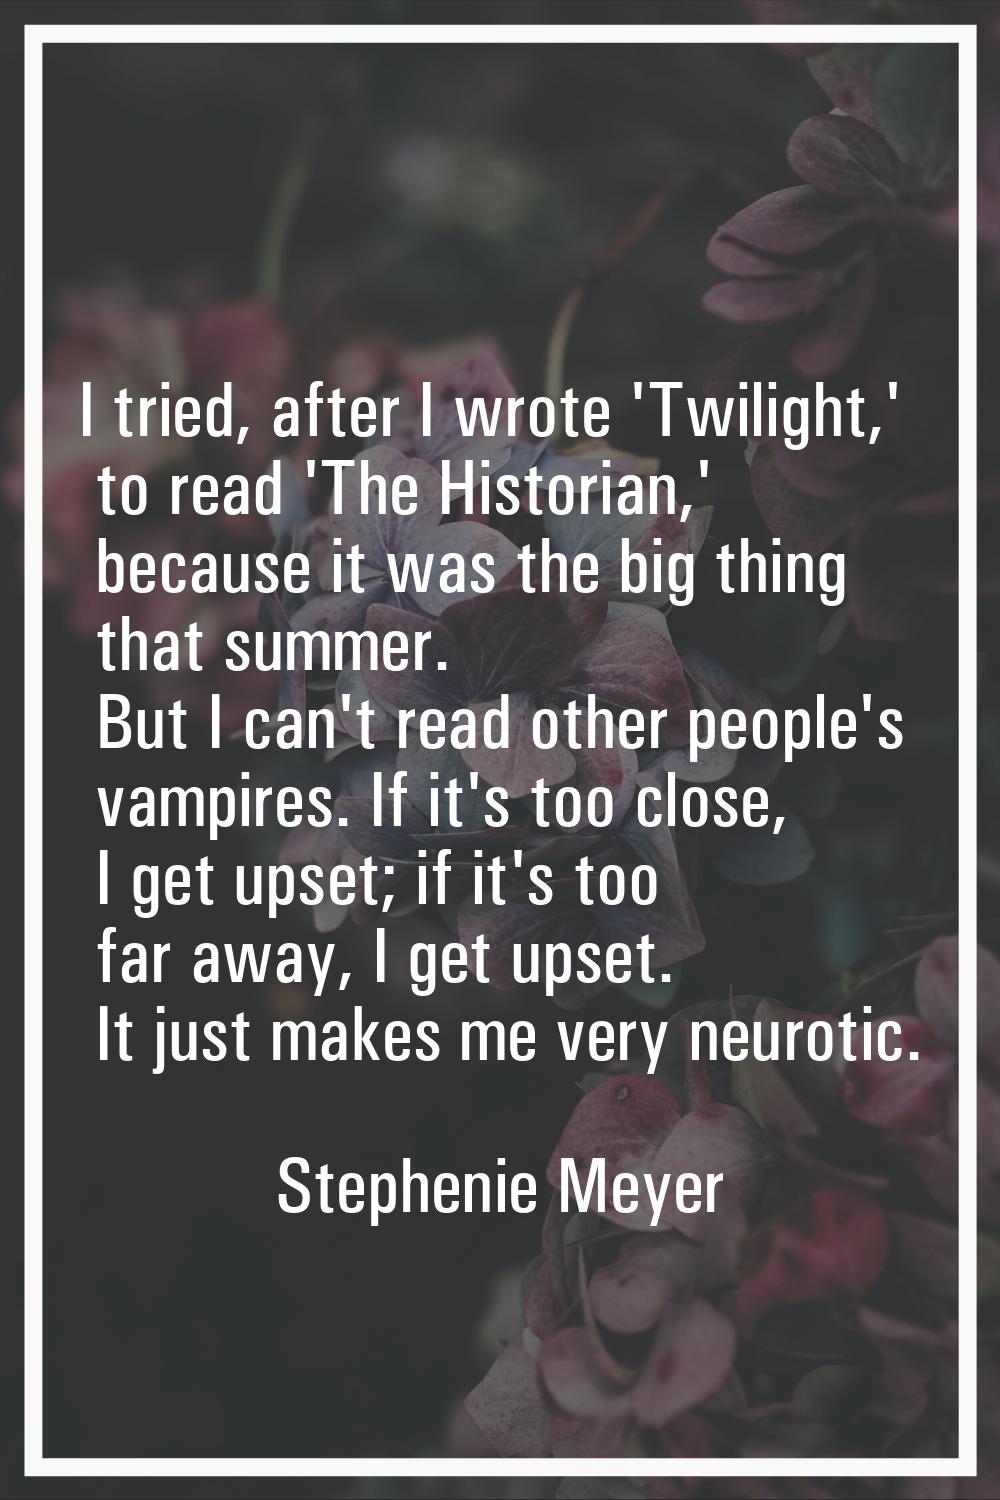 I tried, after I wrote 'Twilight,' to read 'The Historian,' because it was the big thing that summe